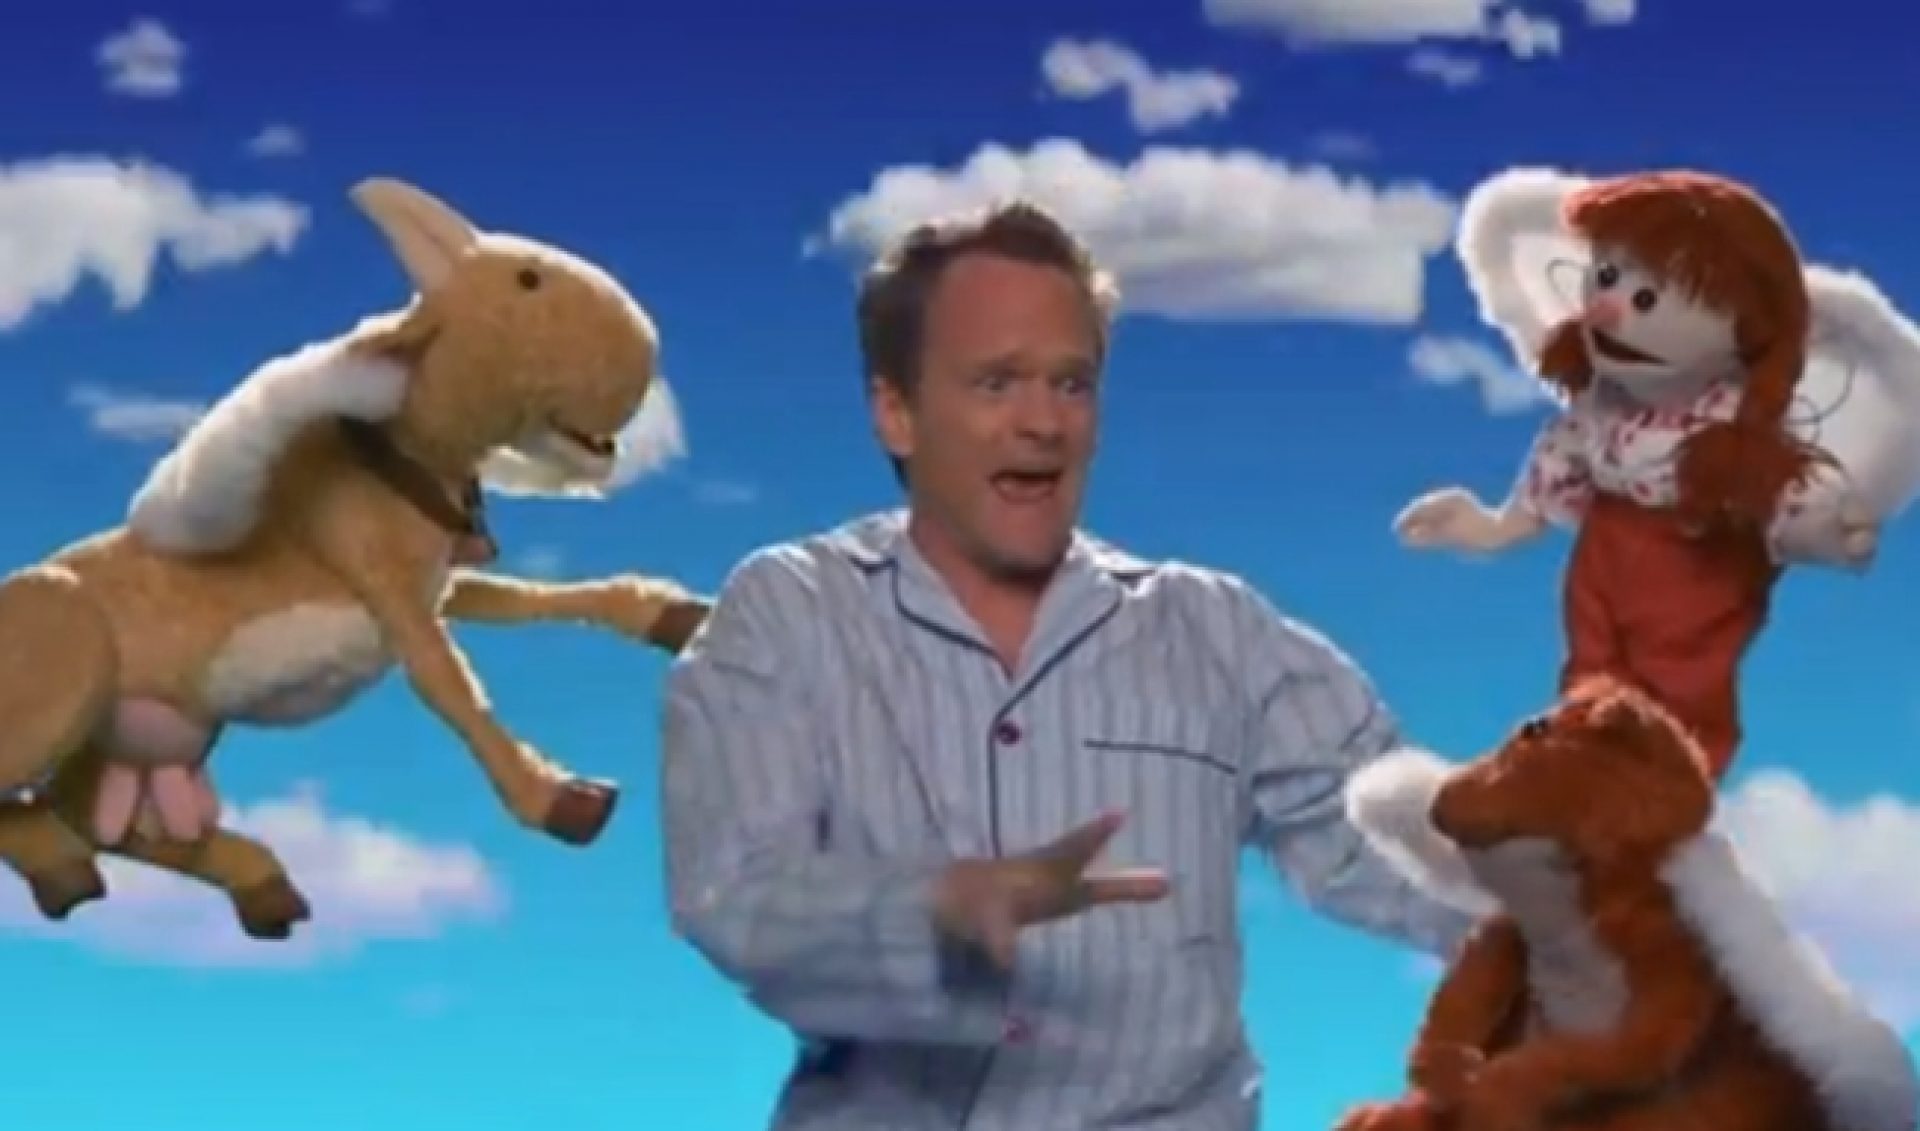 The First Episode of ‘Neil’s Puppet Dreams’ Features Falling, Singing